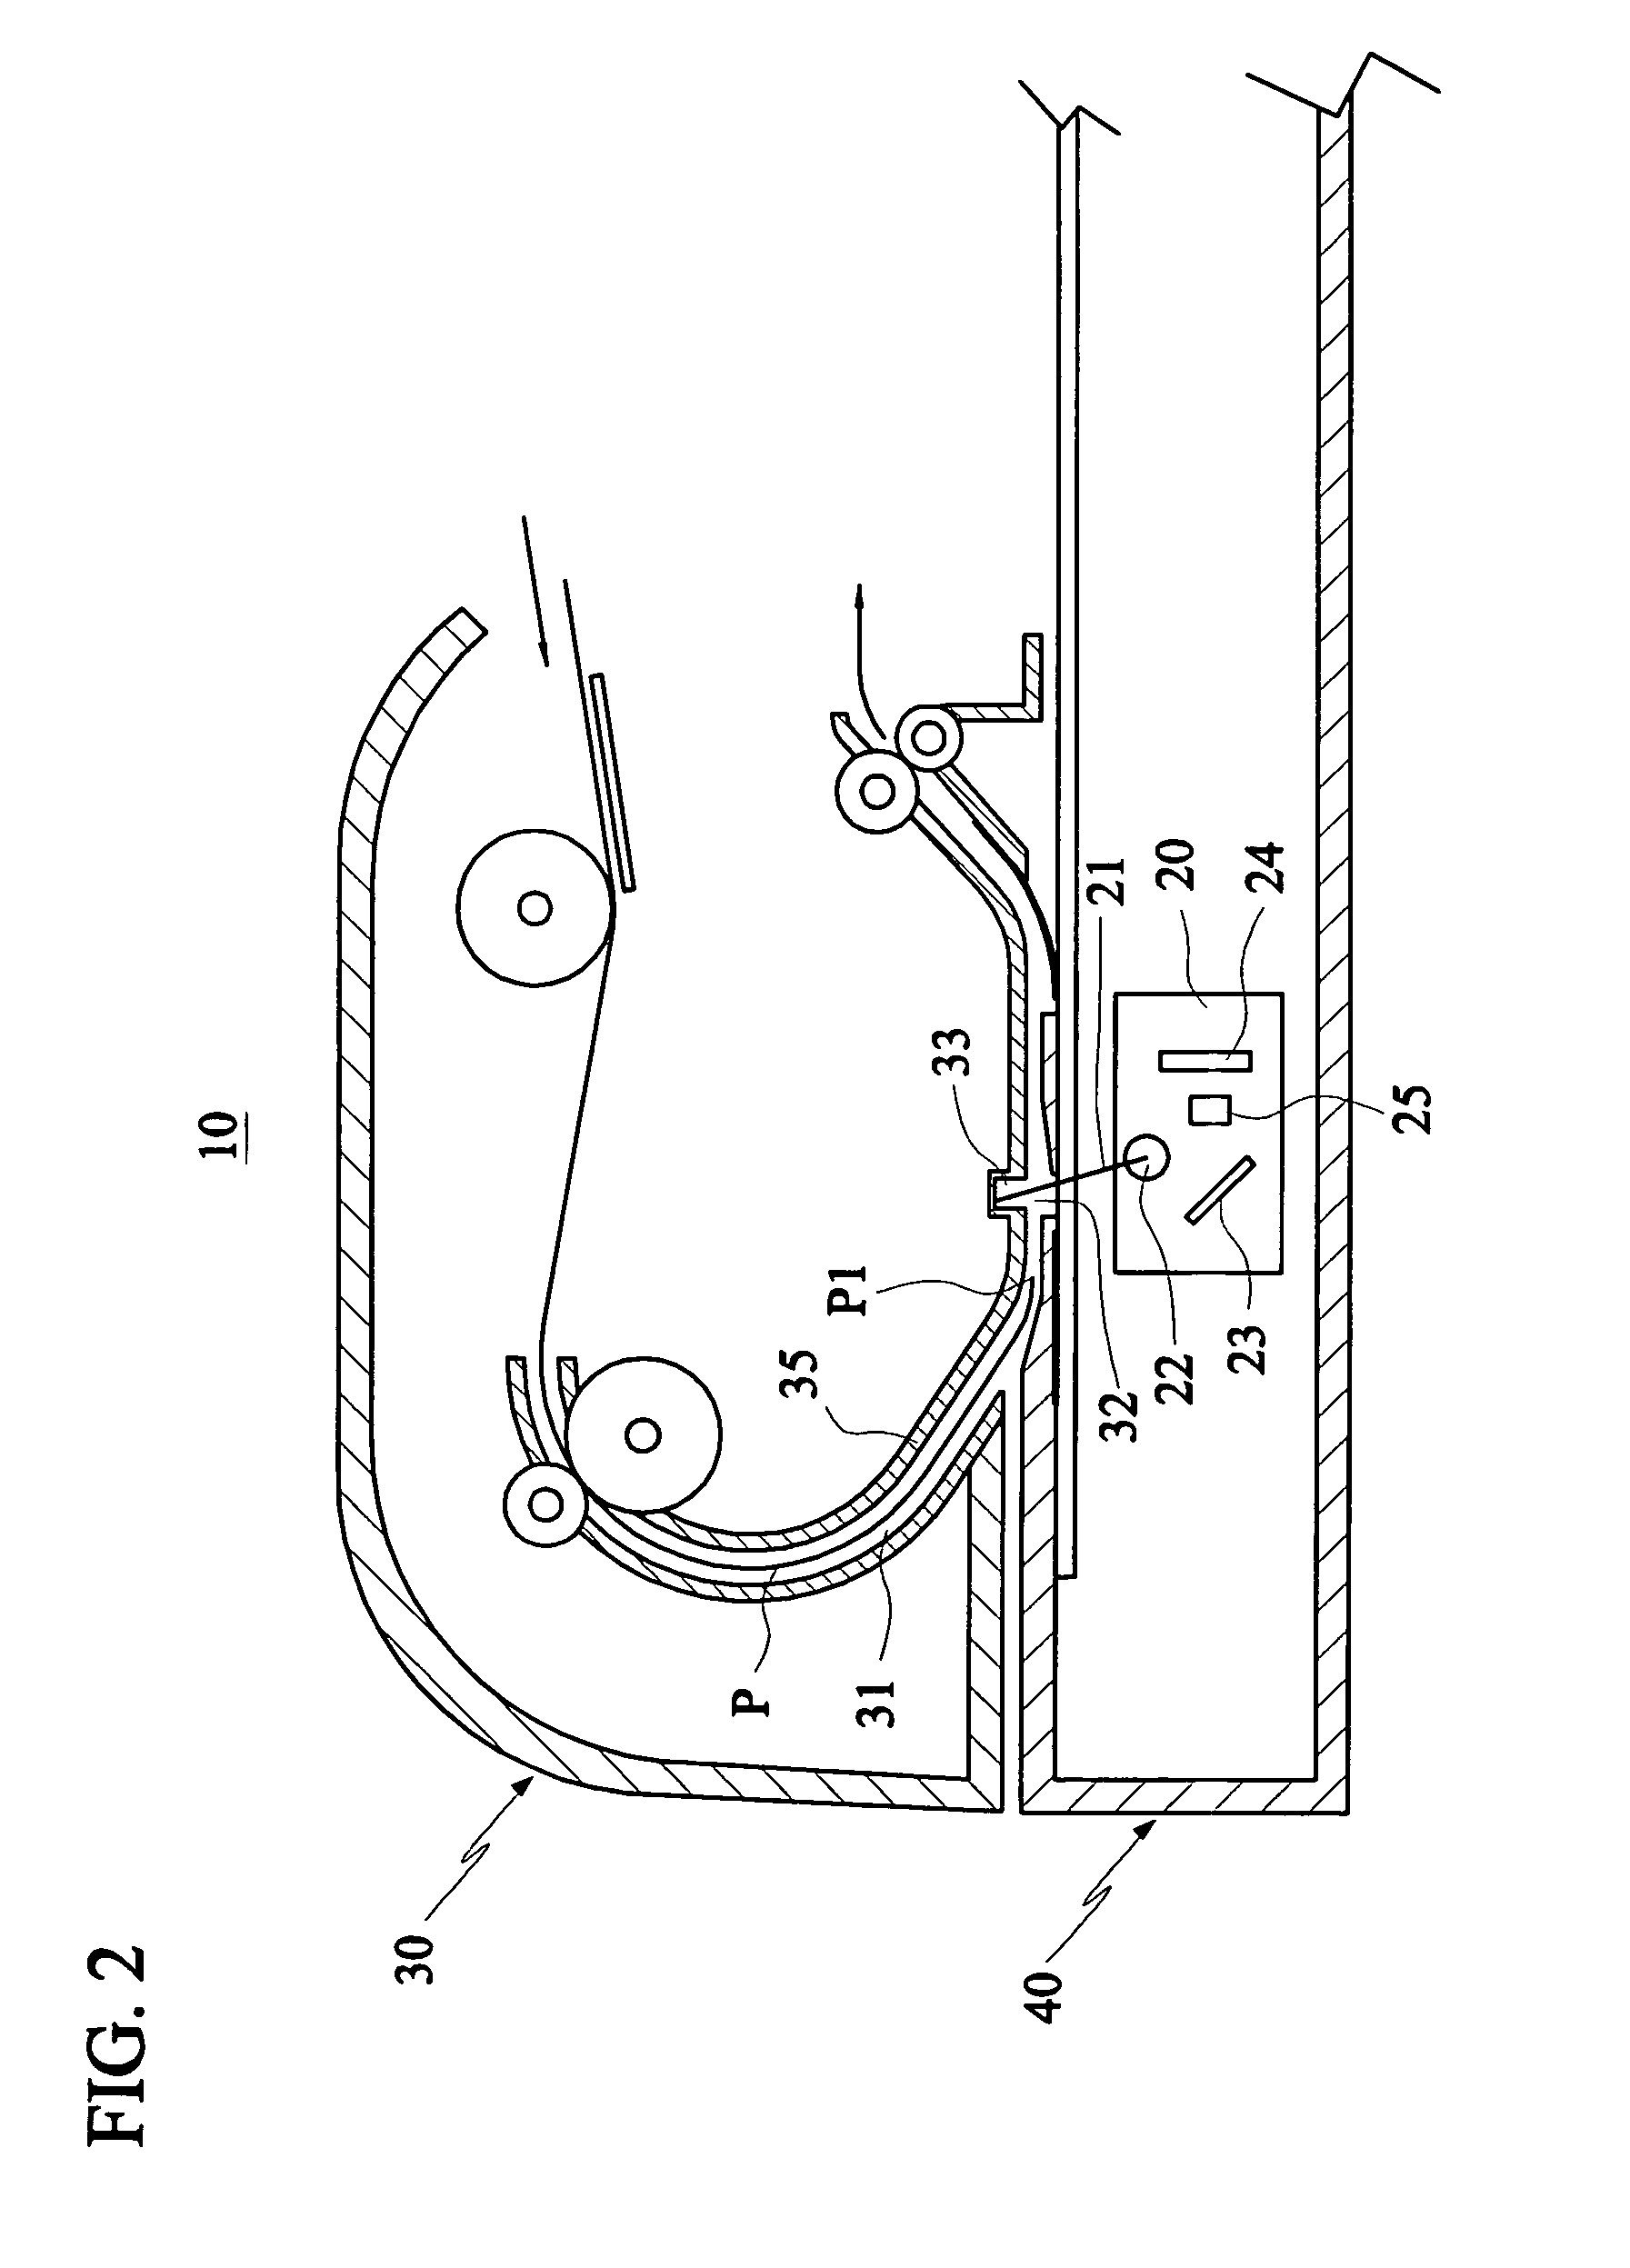 Sheet-fed scanning device capable of detecting a document edge